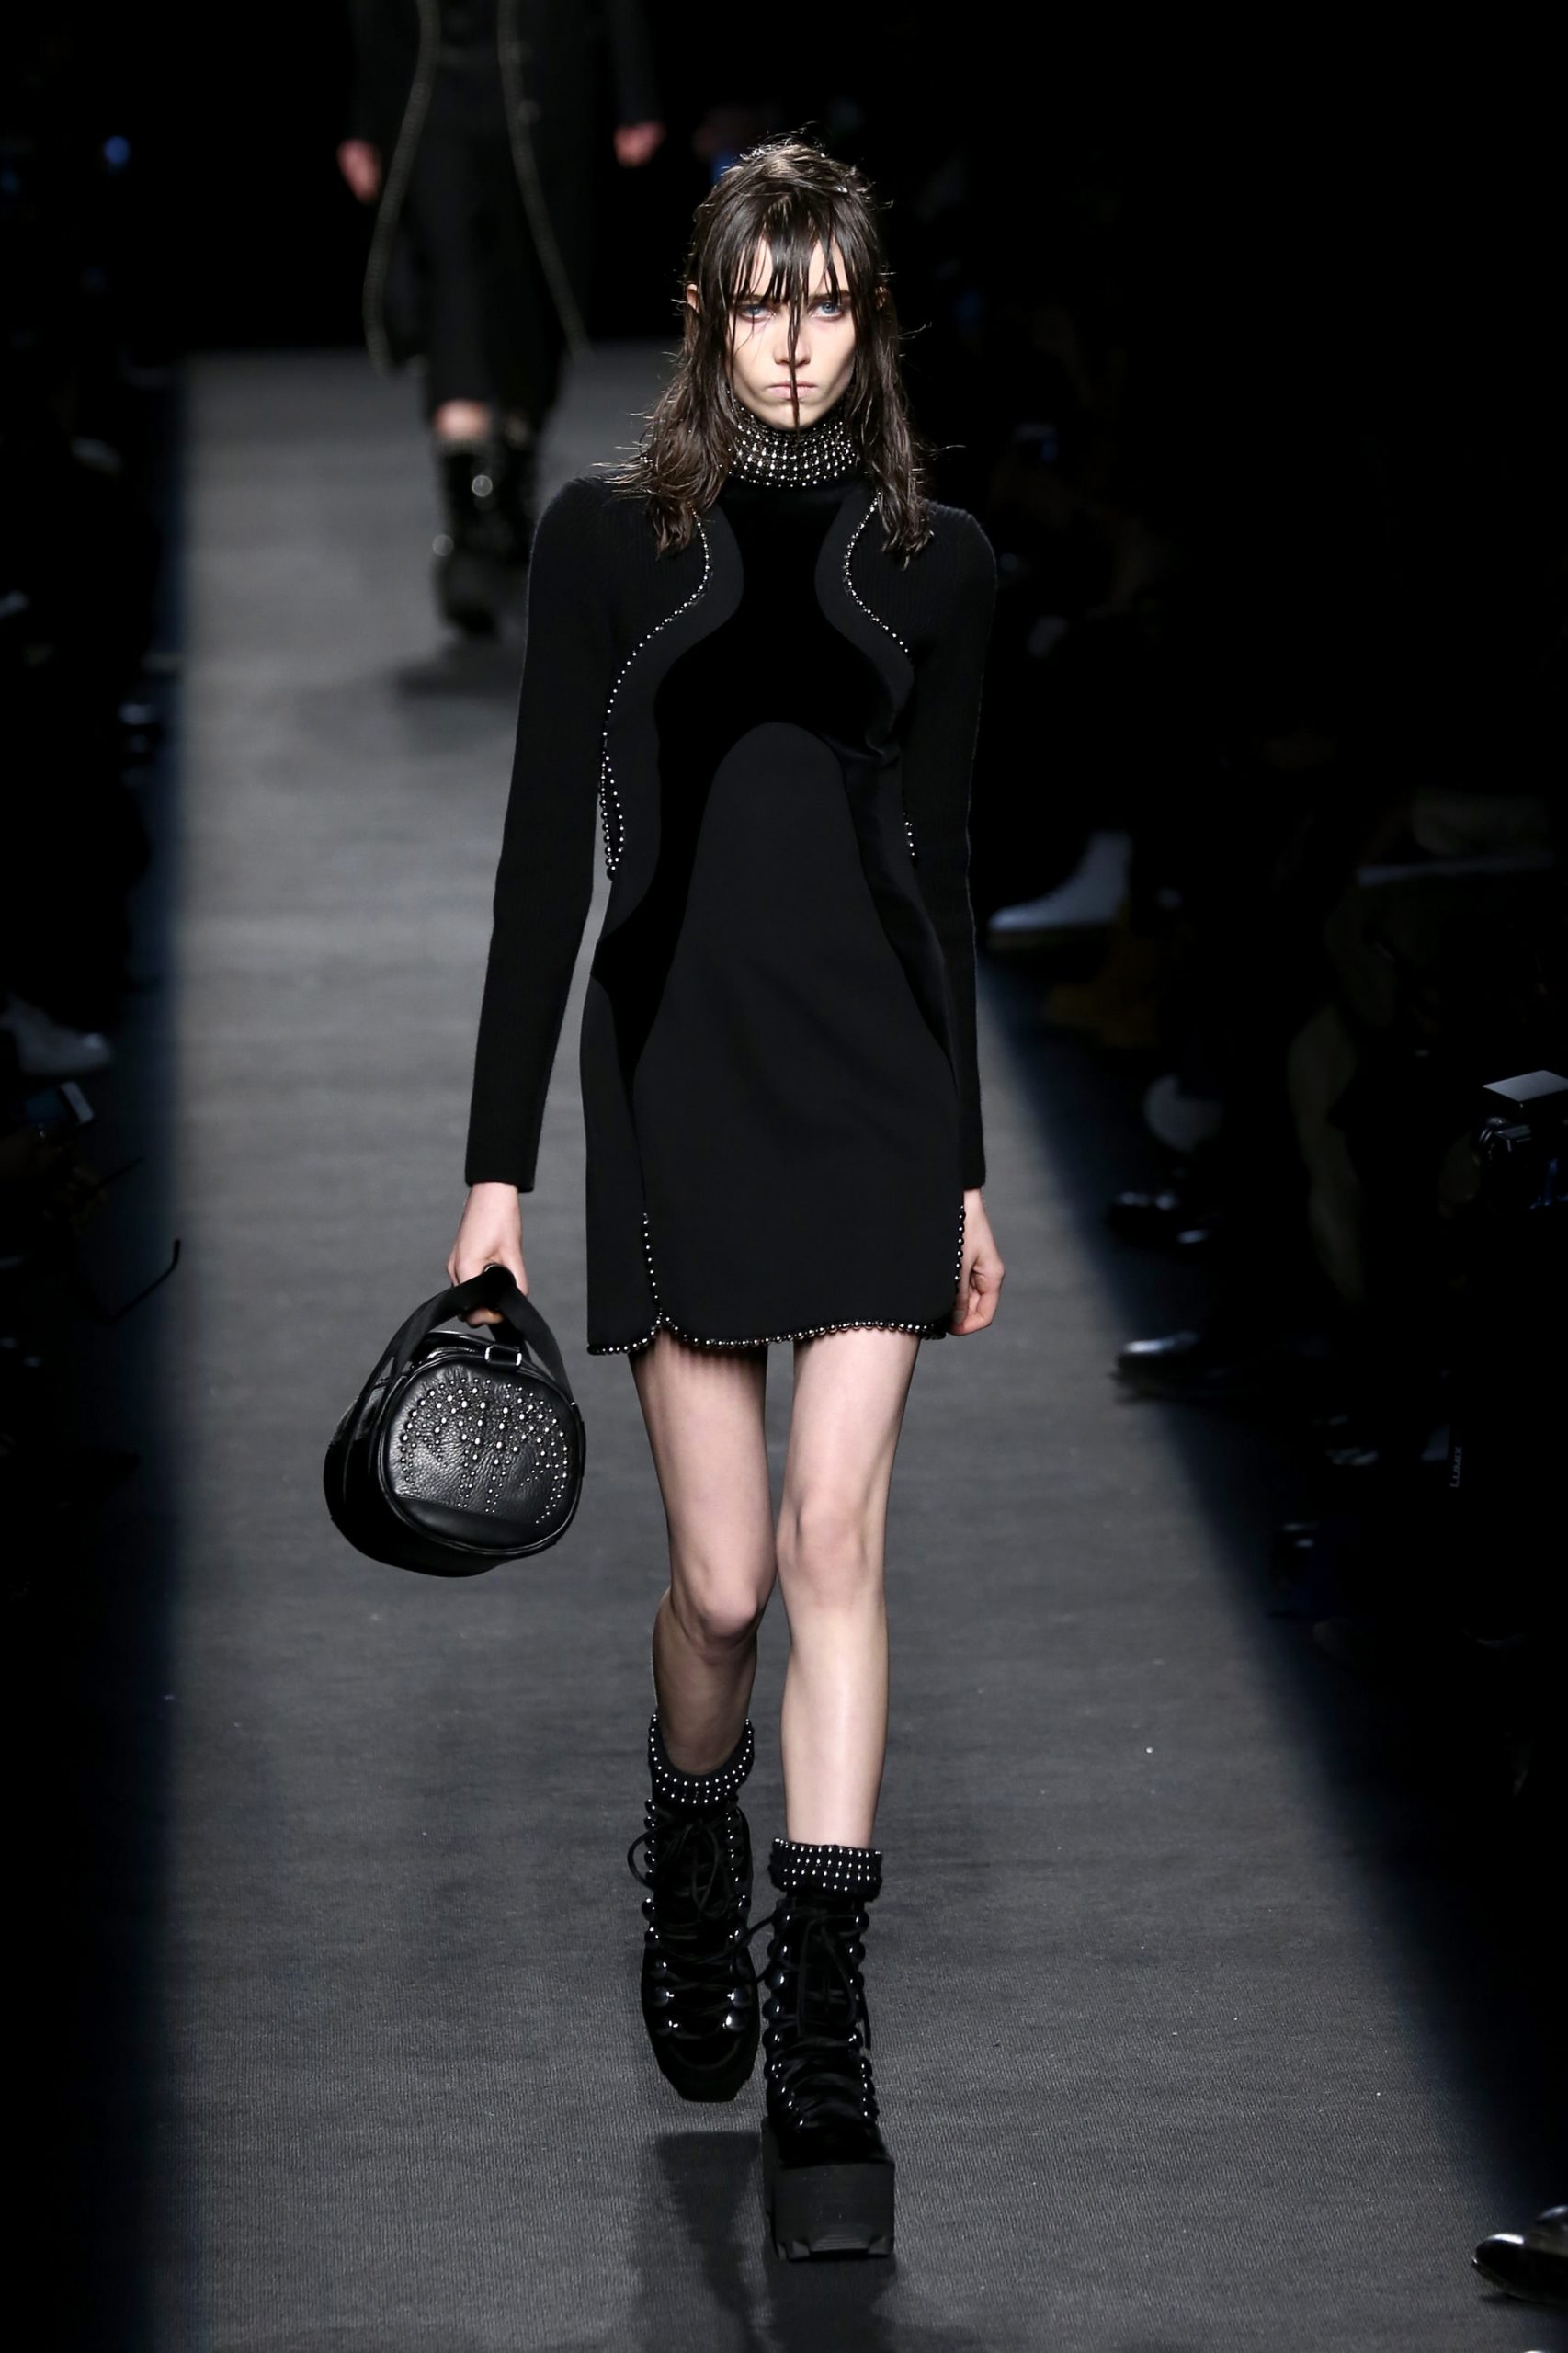 Alexander Wang Captures Reign of Chic and Terror of Fashion's Good